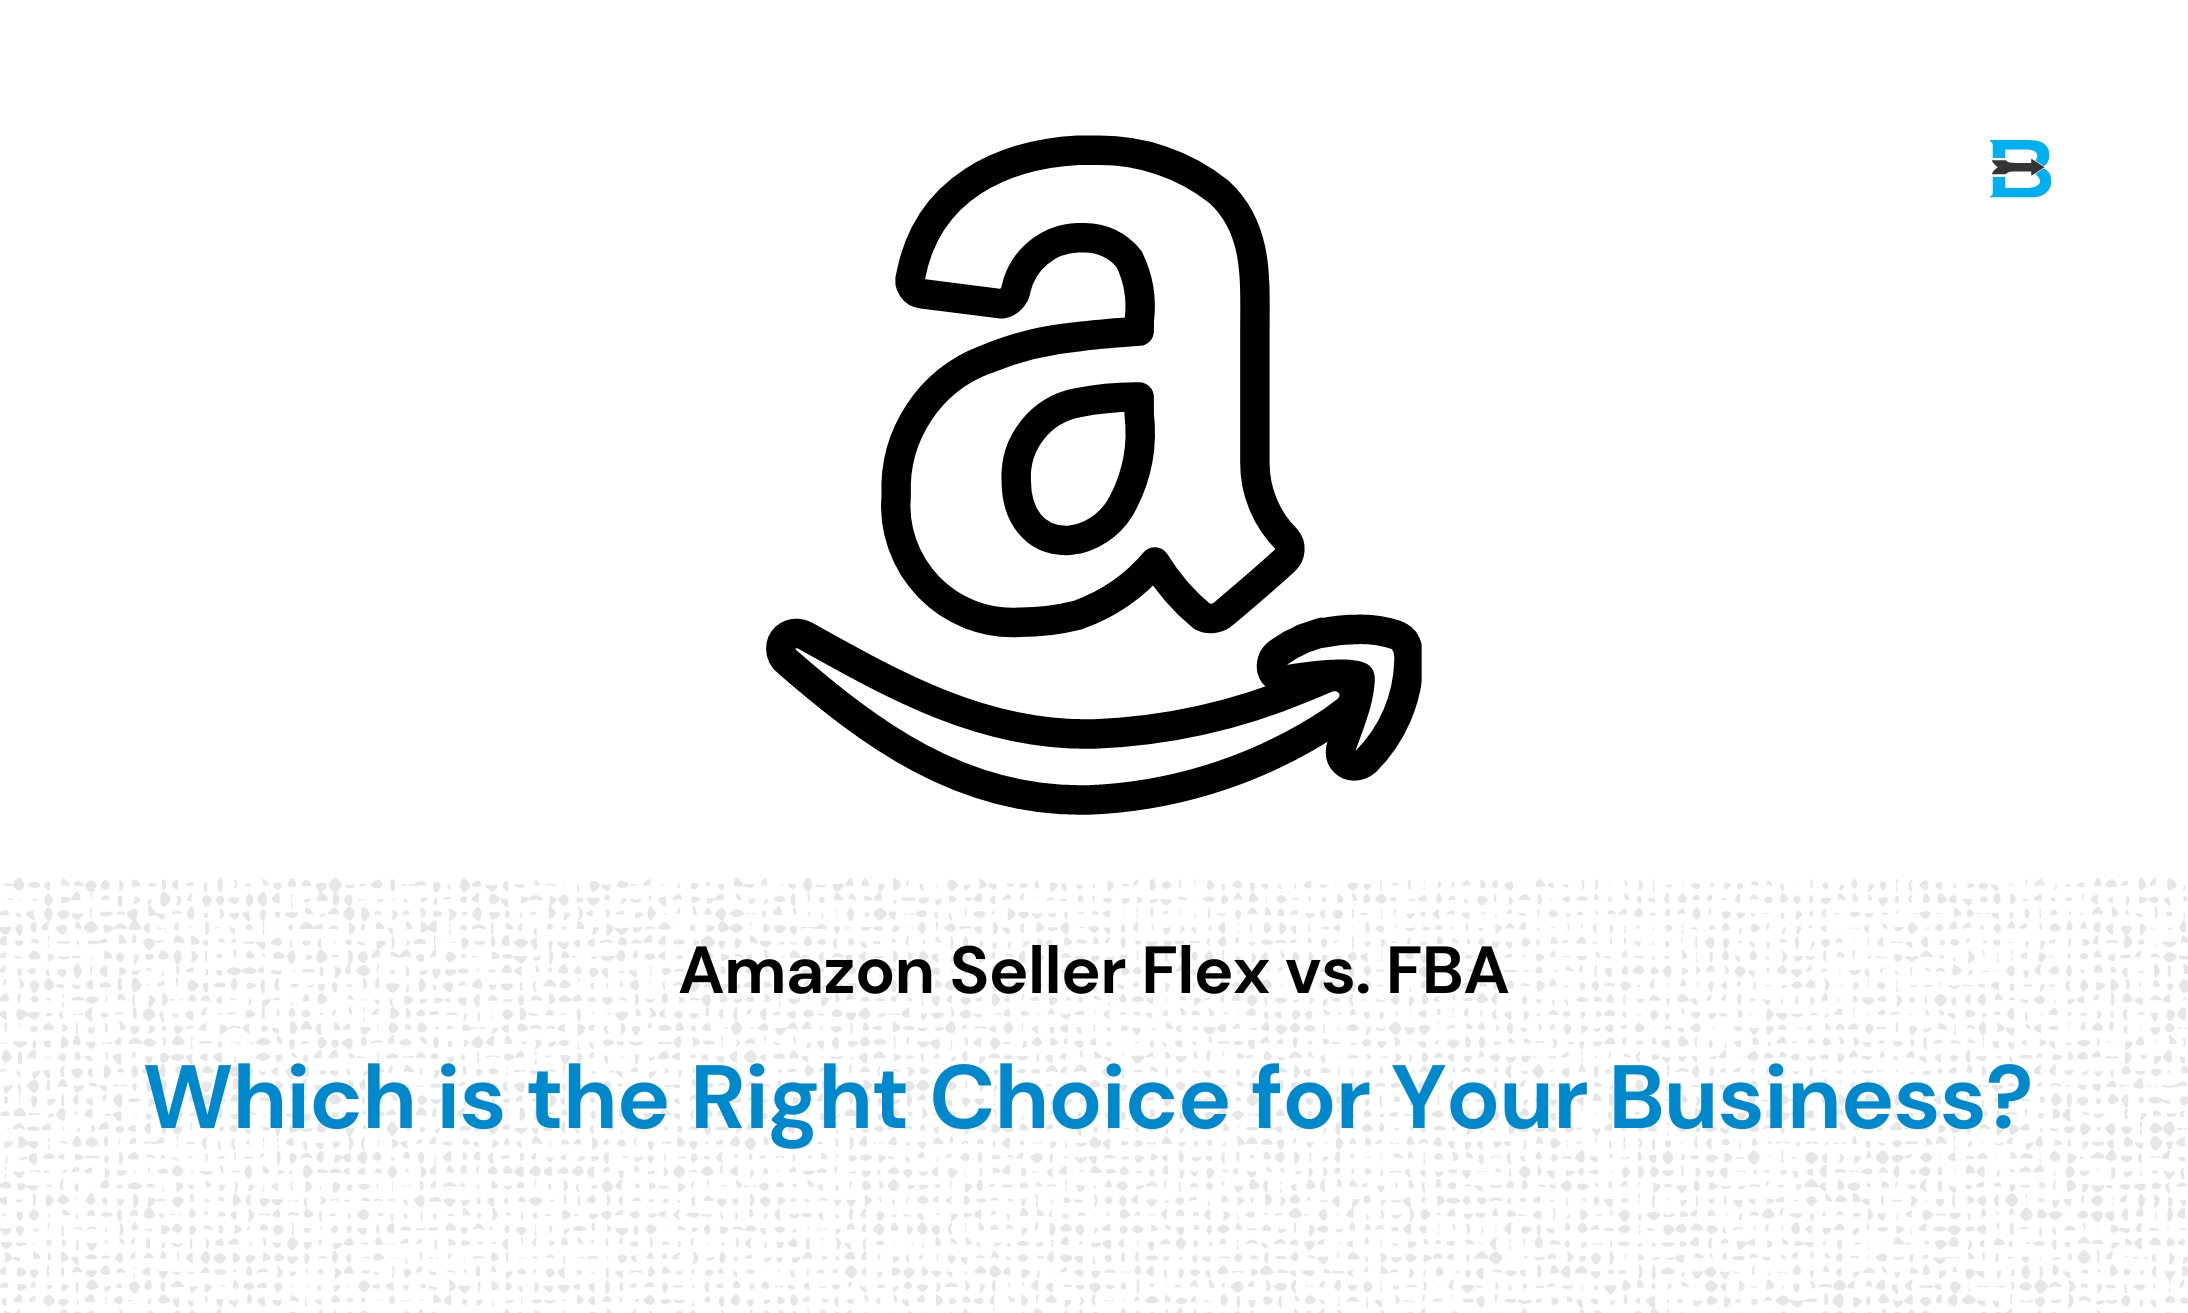 Amazon Seller Flex vs. FBA Which is the Right Choice for Your Business